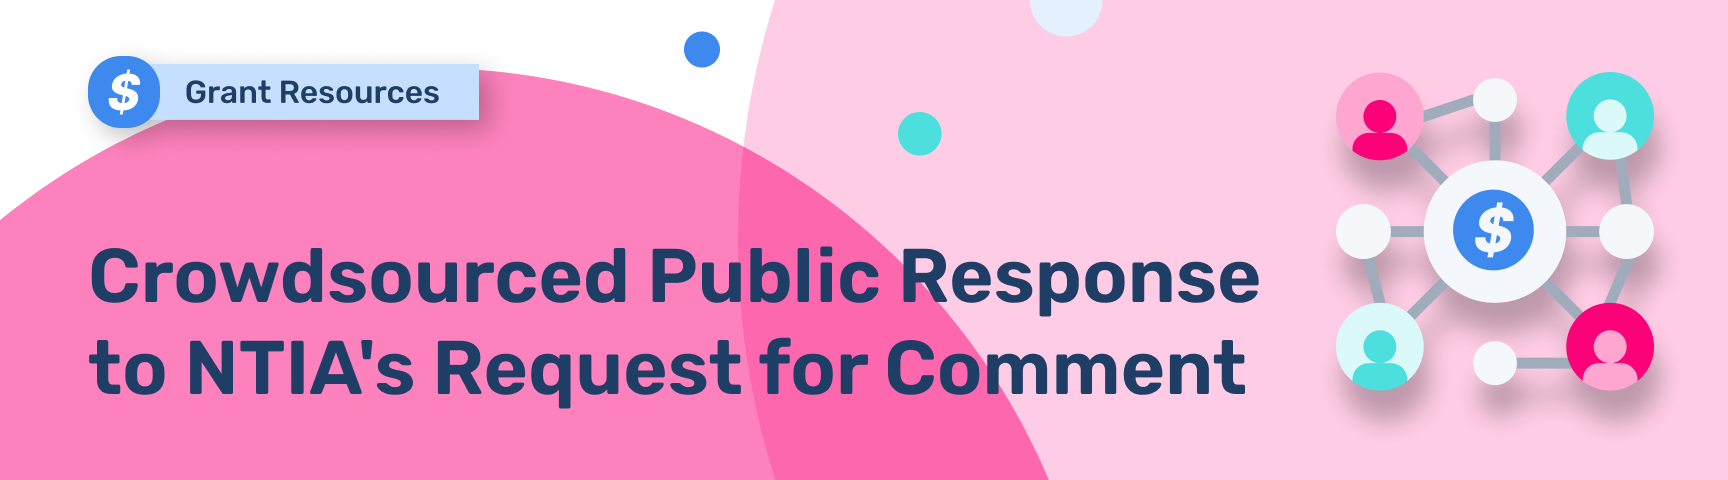 Crowdsourced Public Response to NTIA's Request for Comment Banner Image